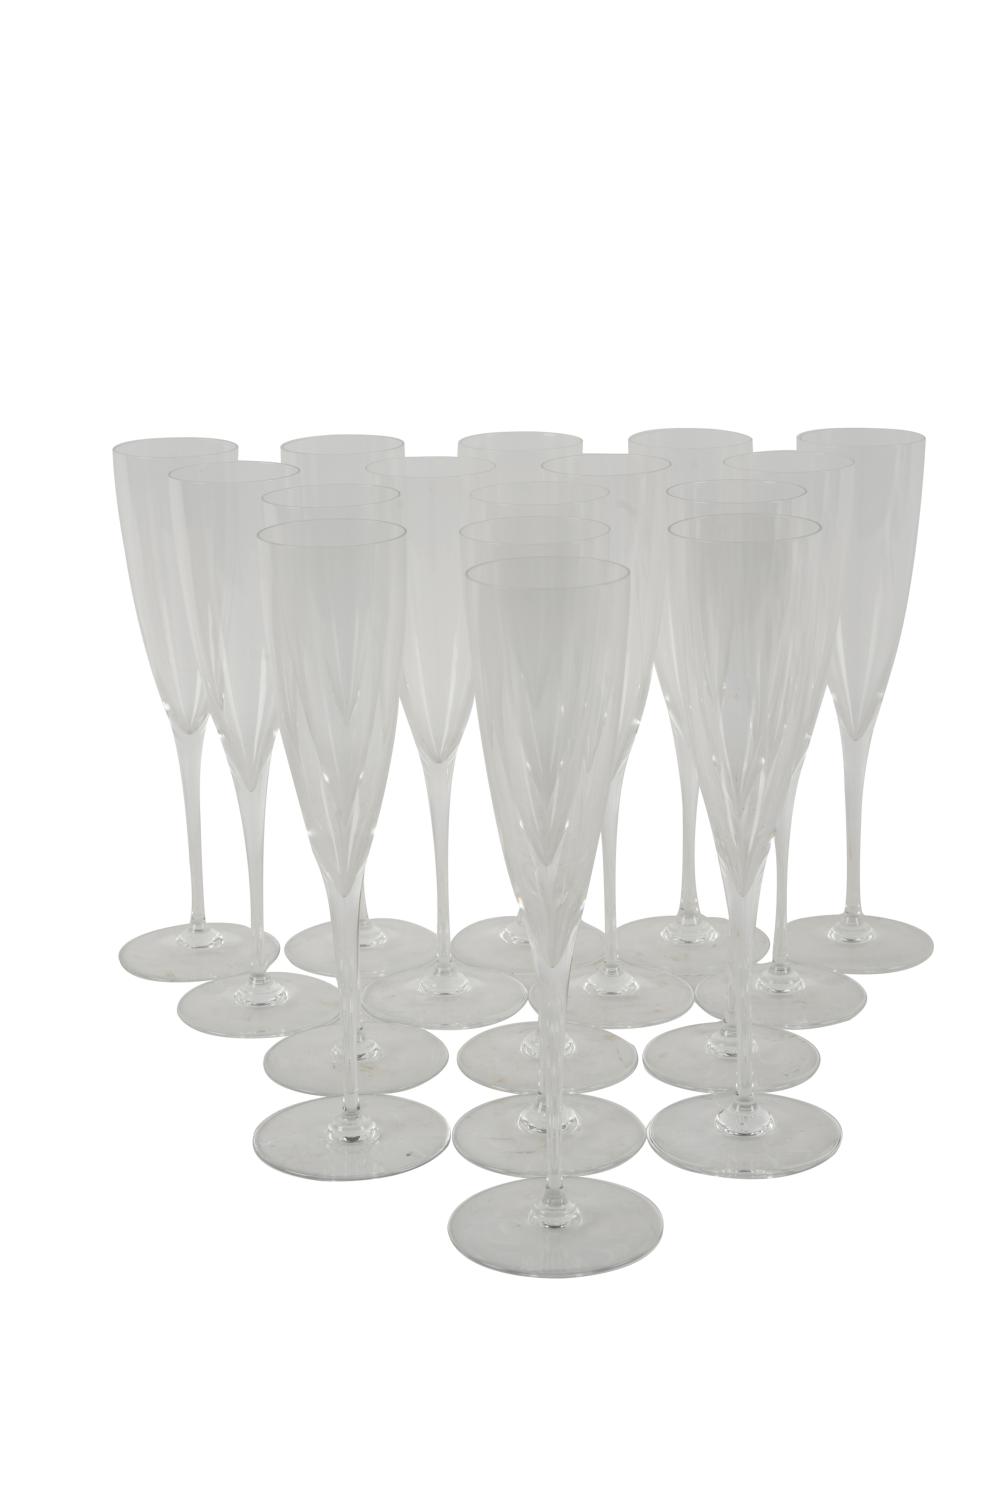 SIXTEEN BACCARAT CRYSTAL CHAMPAGNE 331442